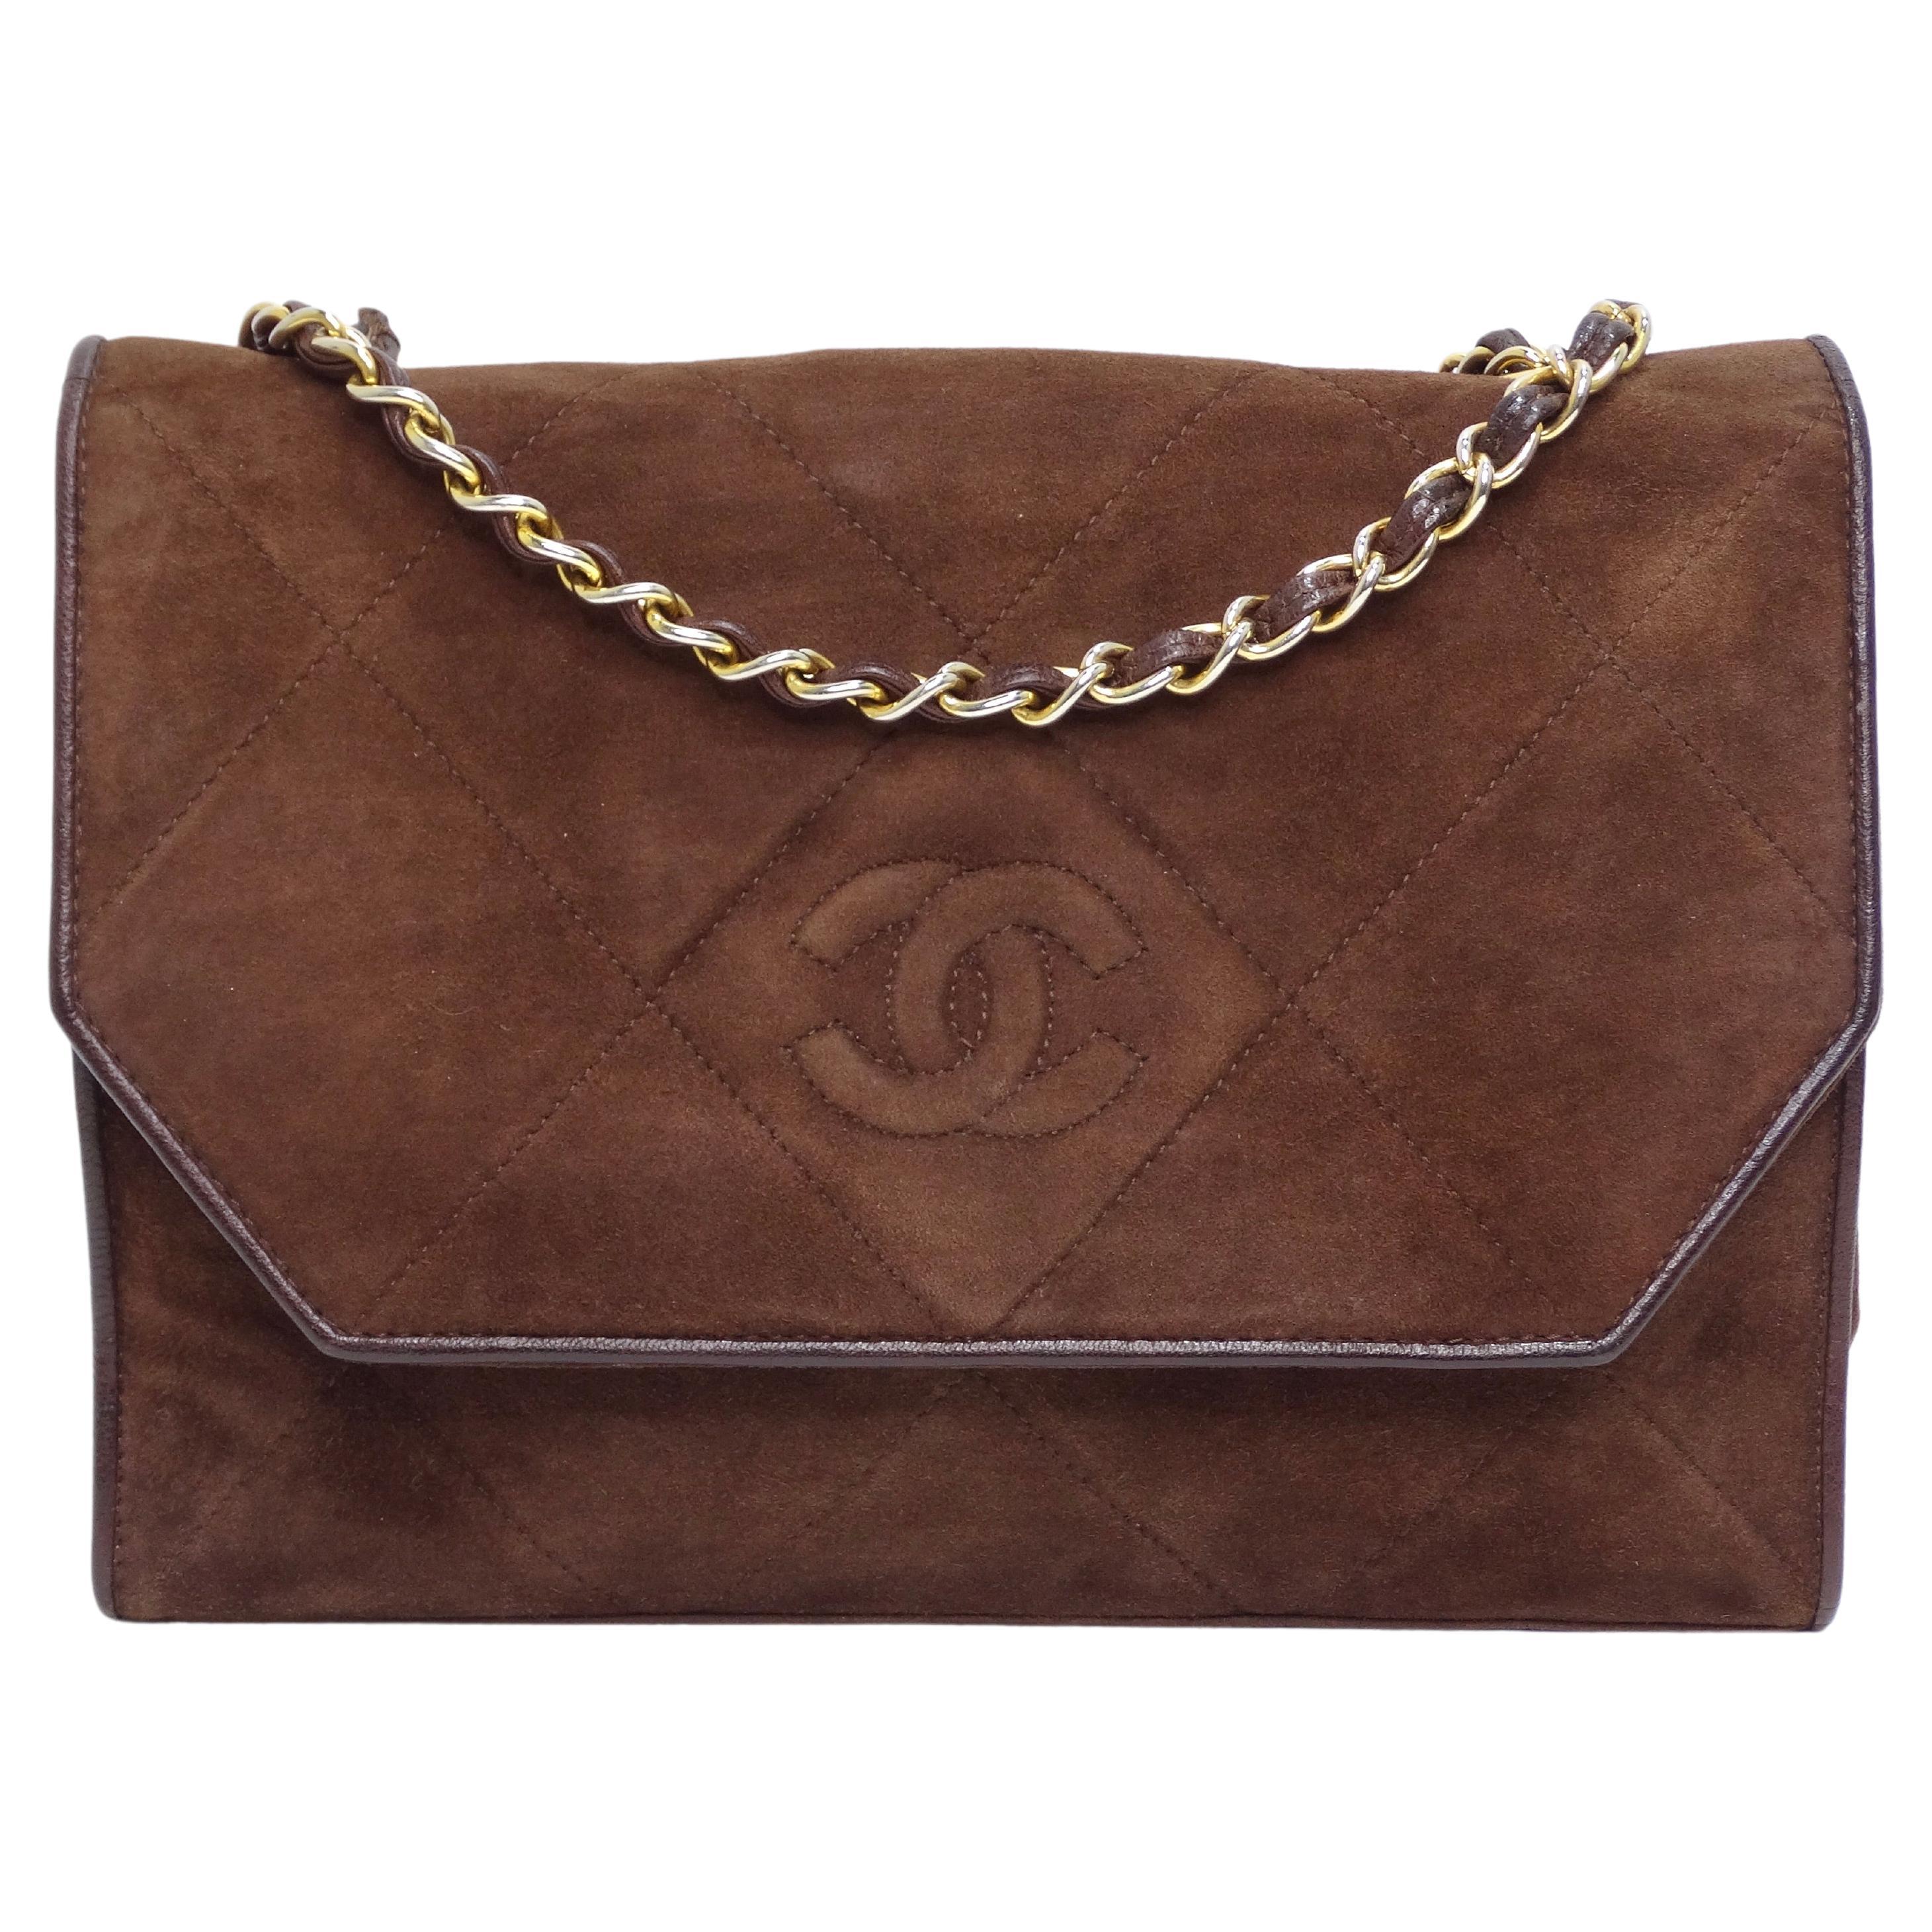 Retro Brown Suede Chanel Bag - 4 For Sale on 1stDibs